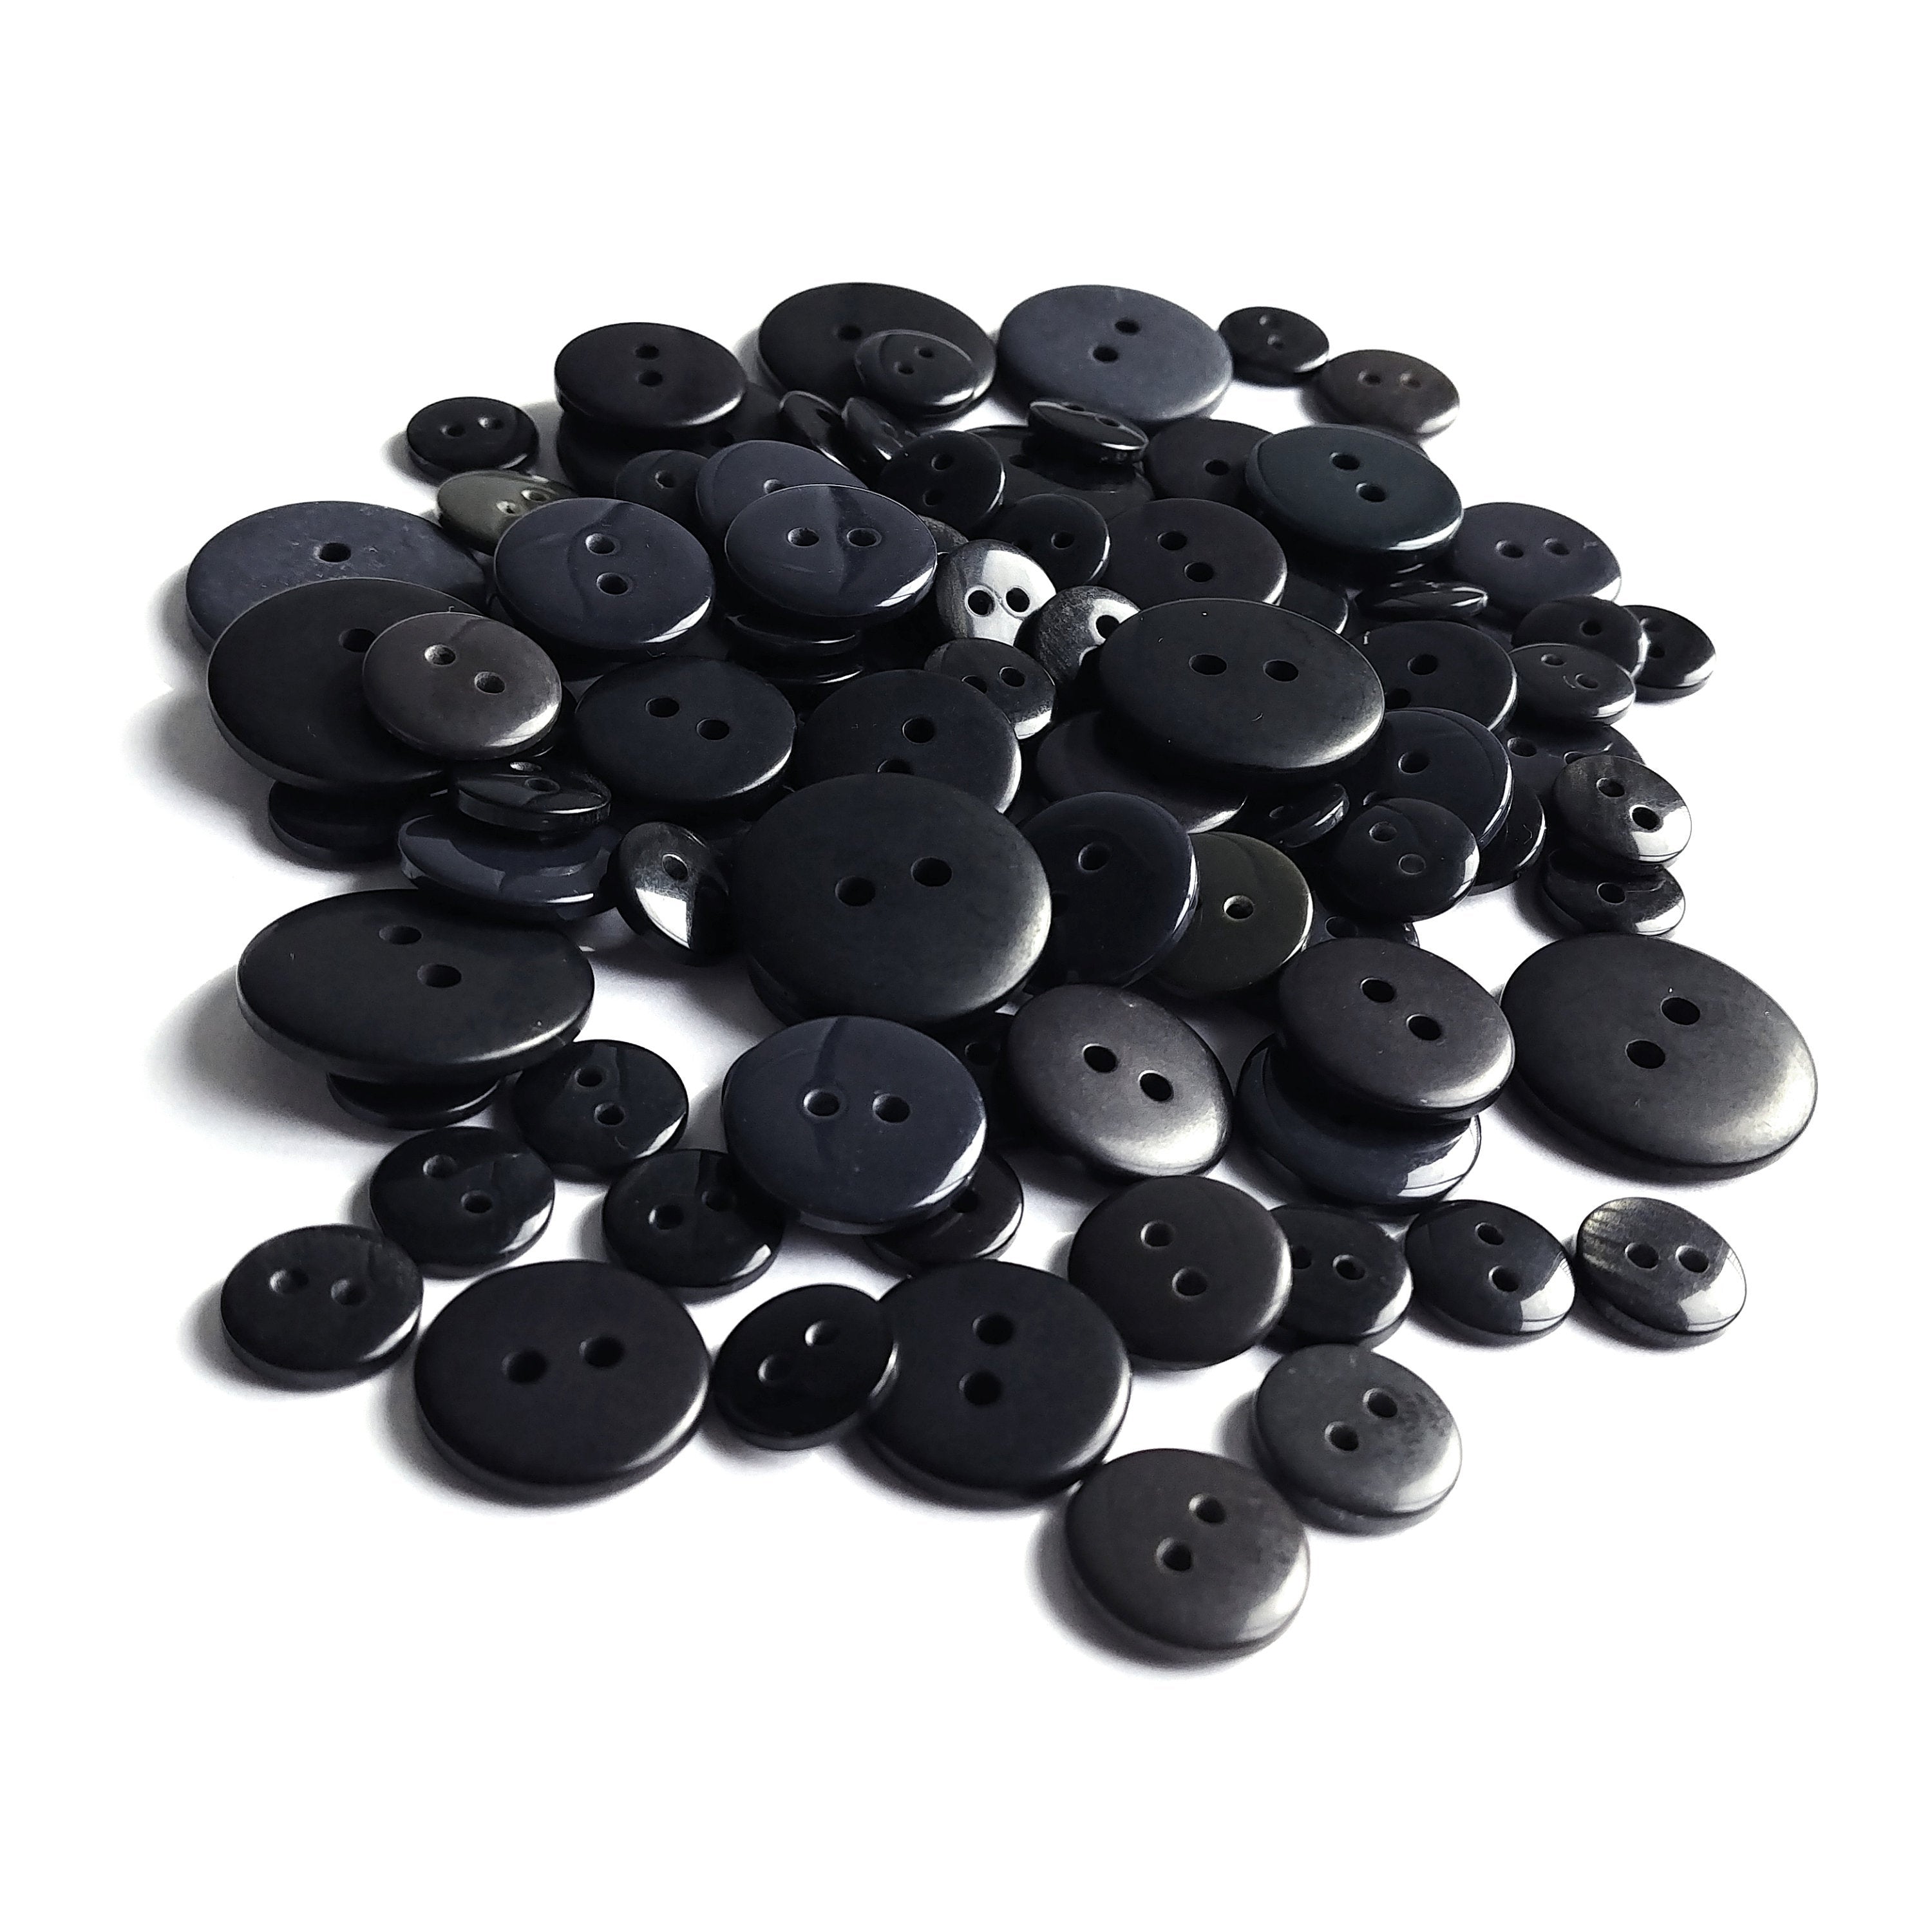  COHEALI 50PCS Resin Sewing Buttons, Round Bulk Buttons